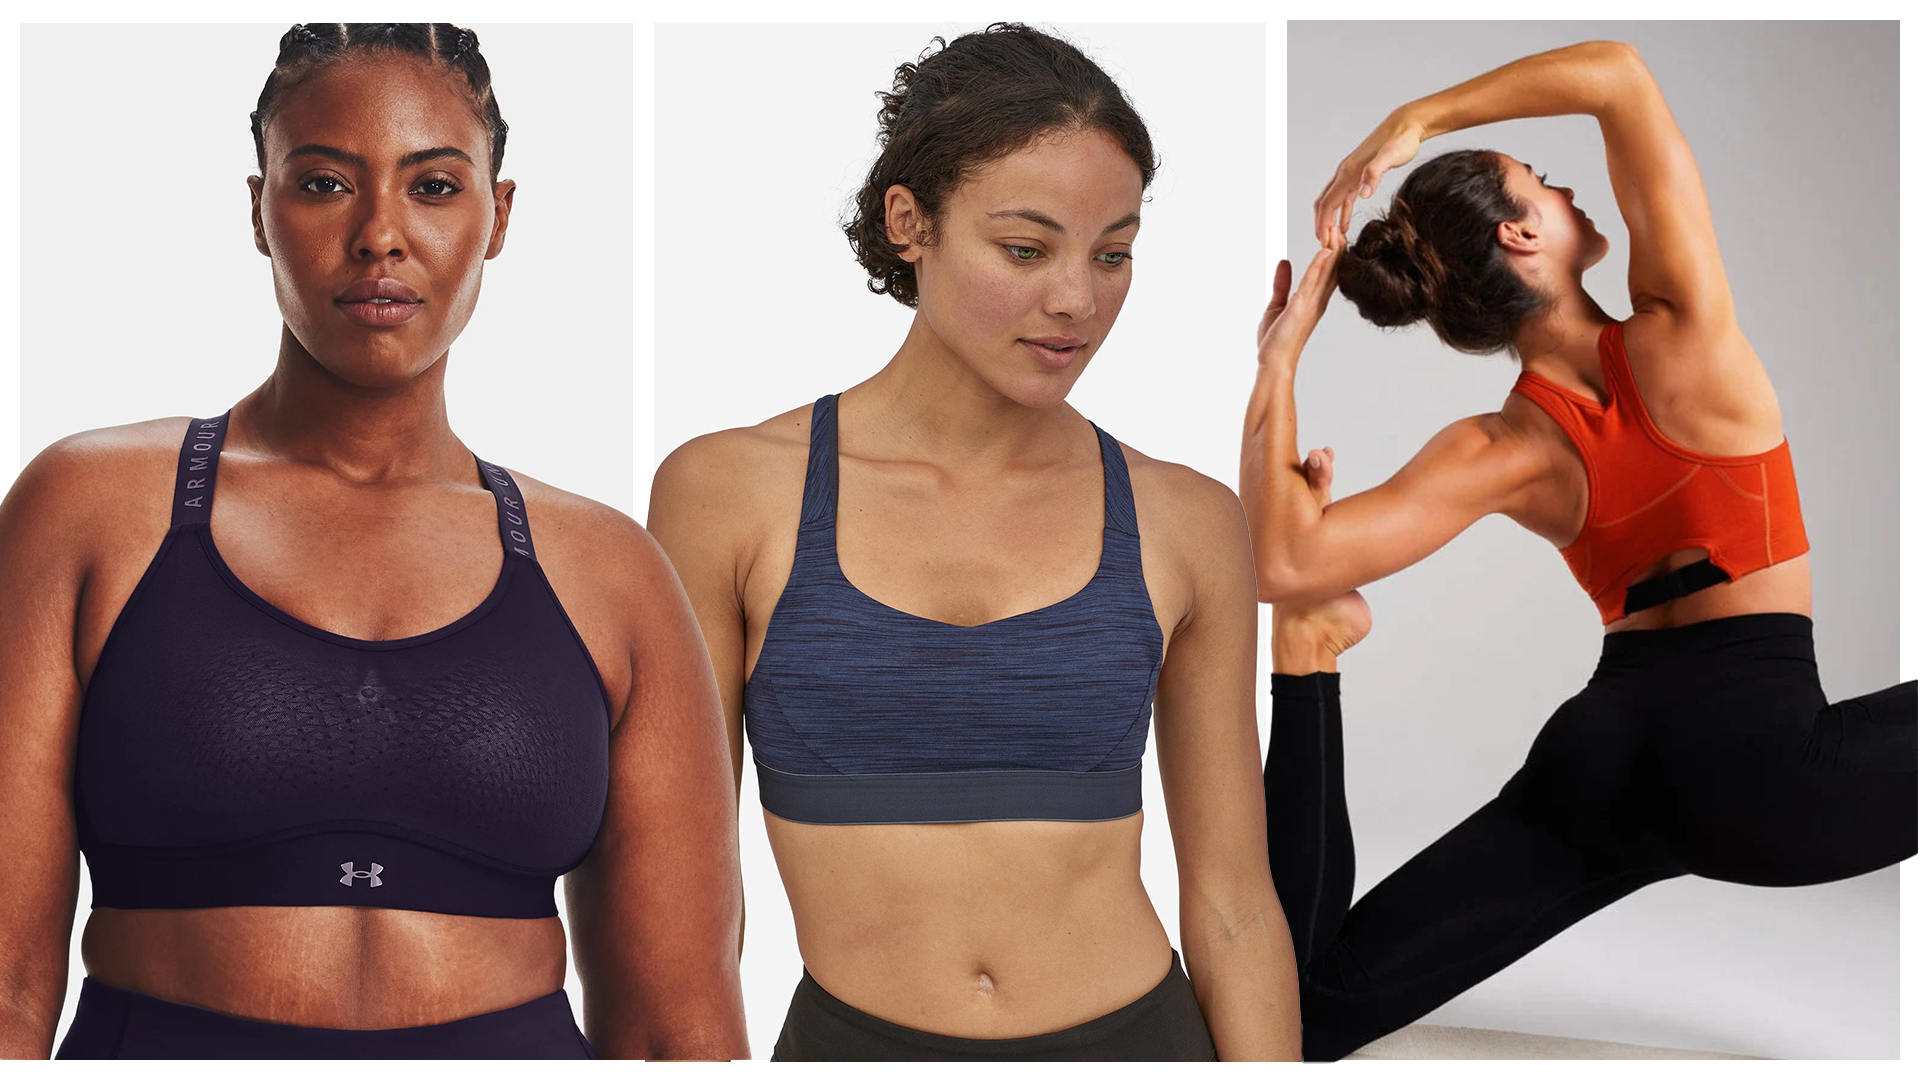 Why you need to wear a sports bra when exercising